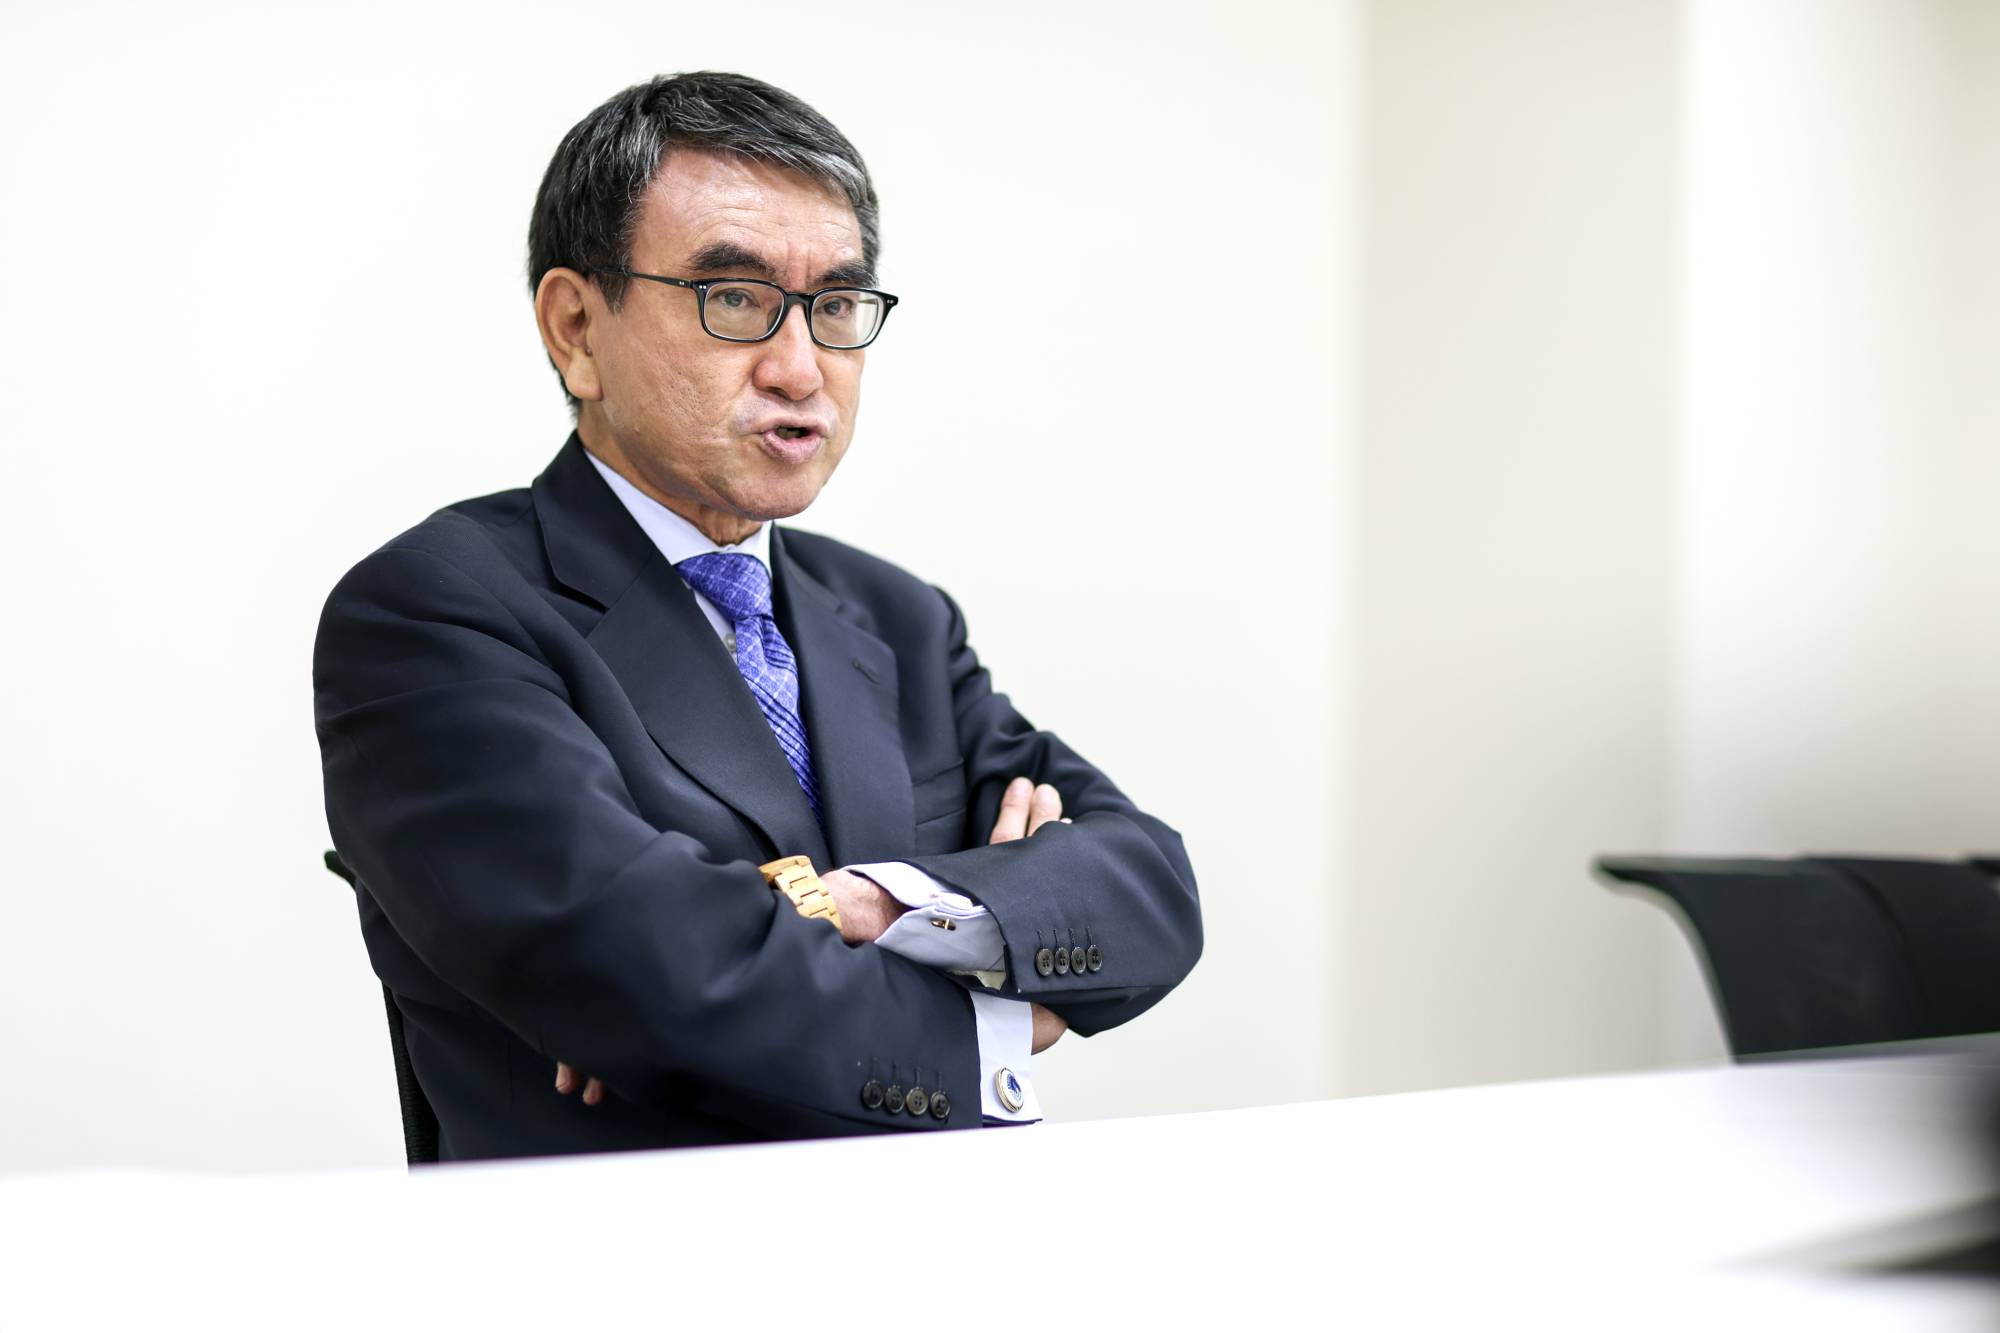 Taro Kono, former regulatory reform and vaccine minister, speaks during an interview in Tokyo on Wednesday. | BLOOMBERG